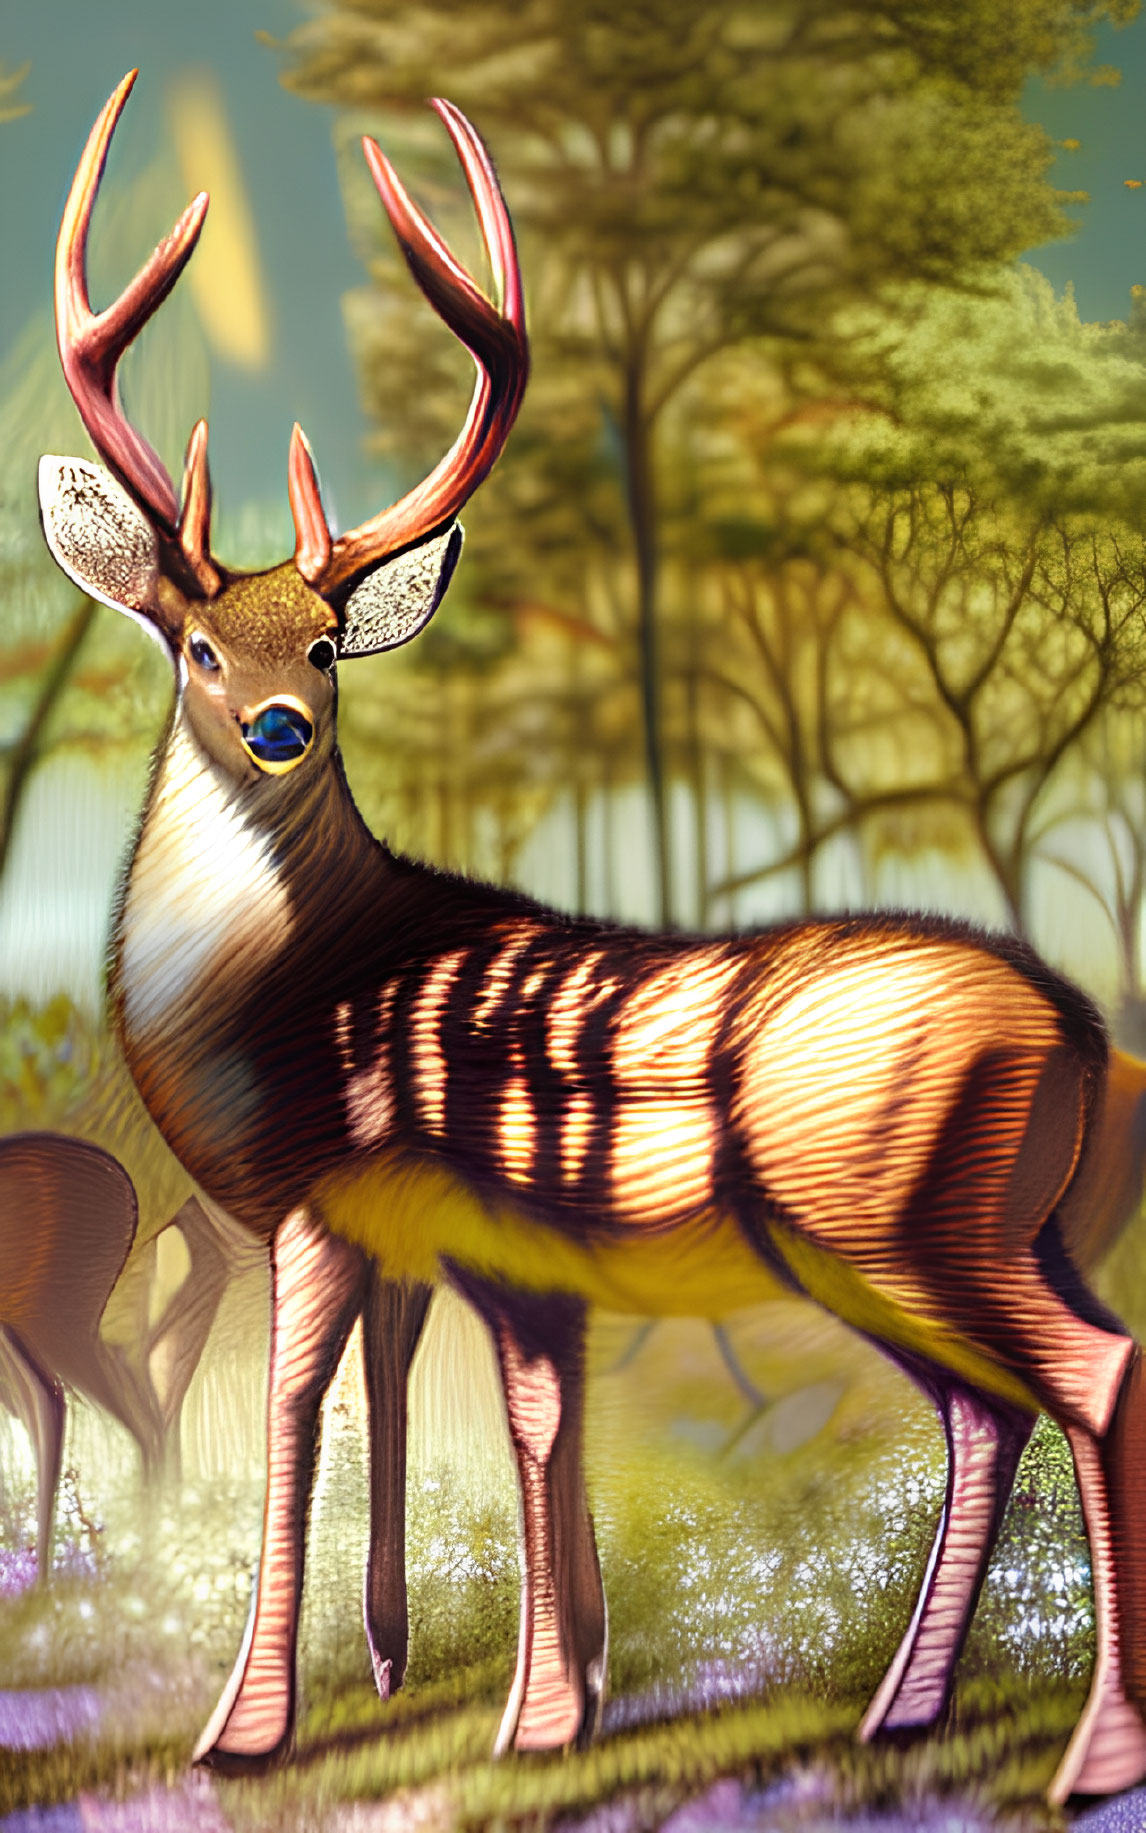 Exaggerated deer with elaborate antlers and vibrant stripes in forest setting